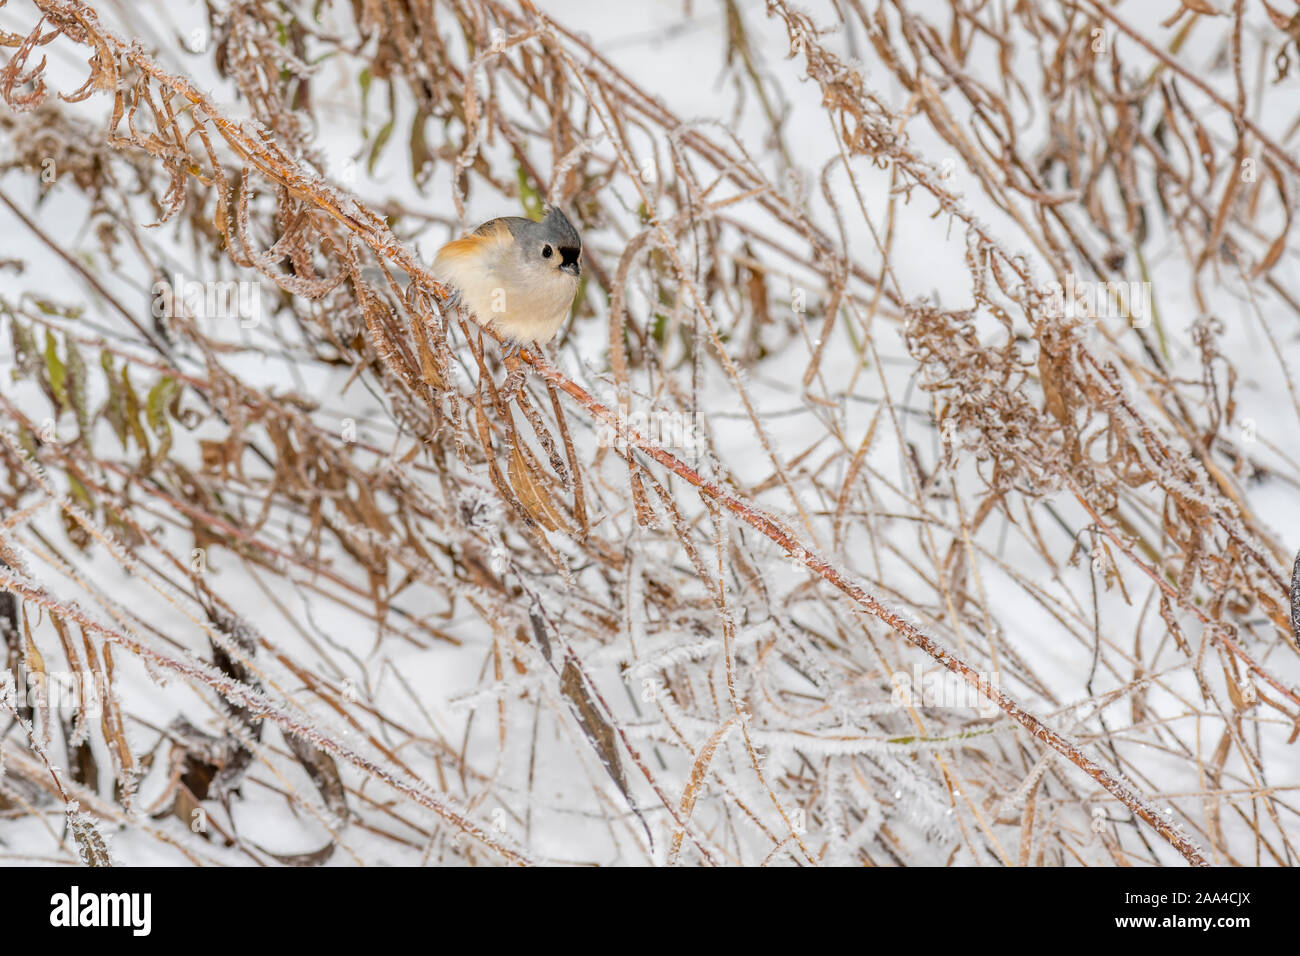 A tufted titmouse (Baeolophus bicolor) perched with a snowy background. Stock Photo